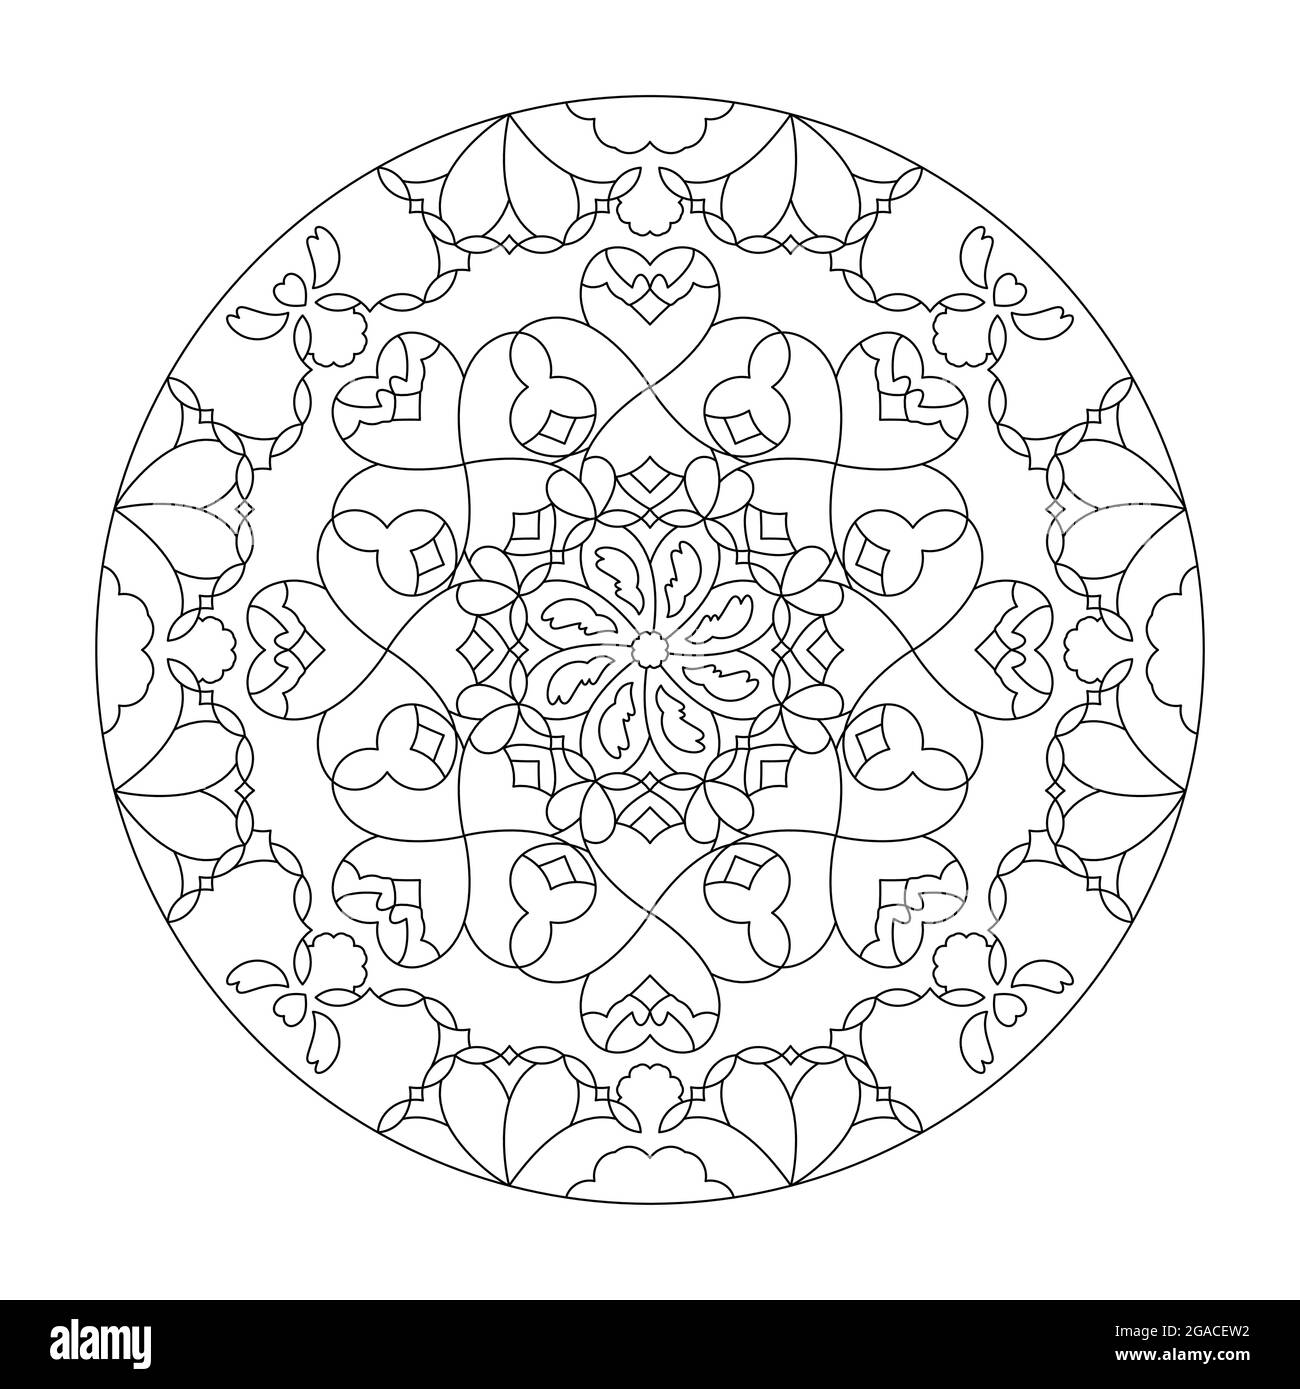 Mandala. Hearts. Anti-stress coloring page. Art Therapy. Vector illustration black and white. Stock Vector